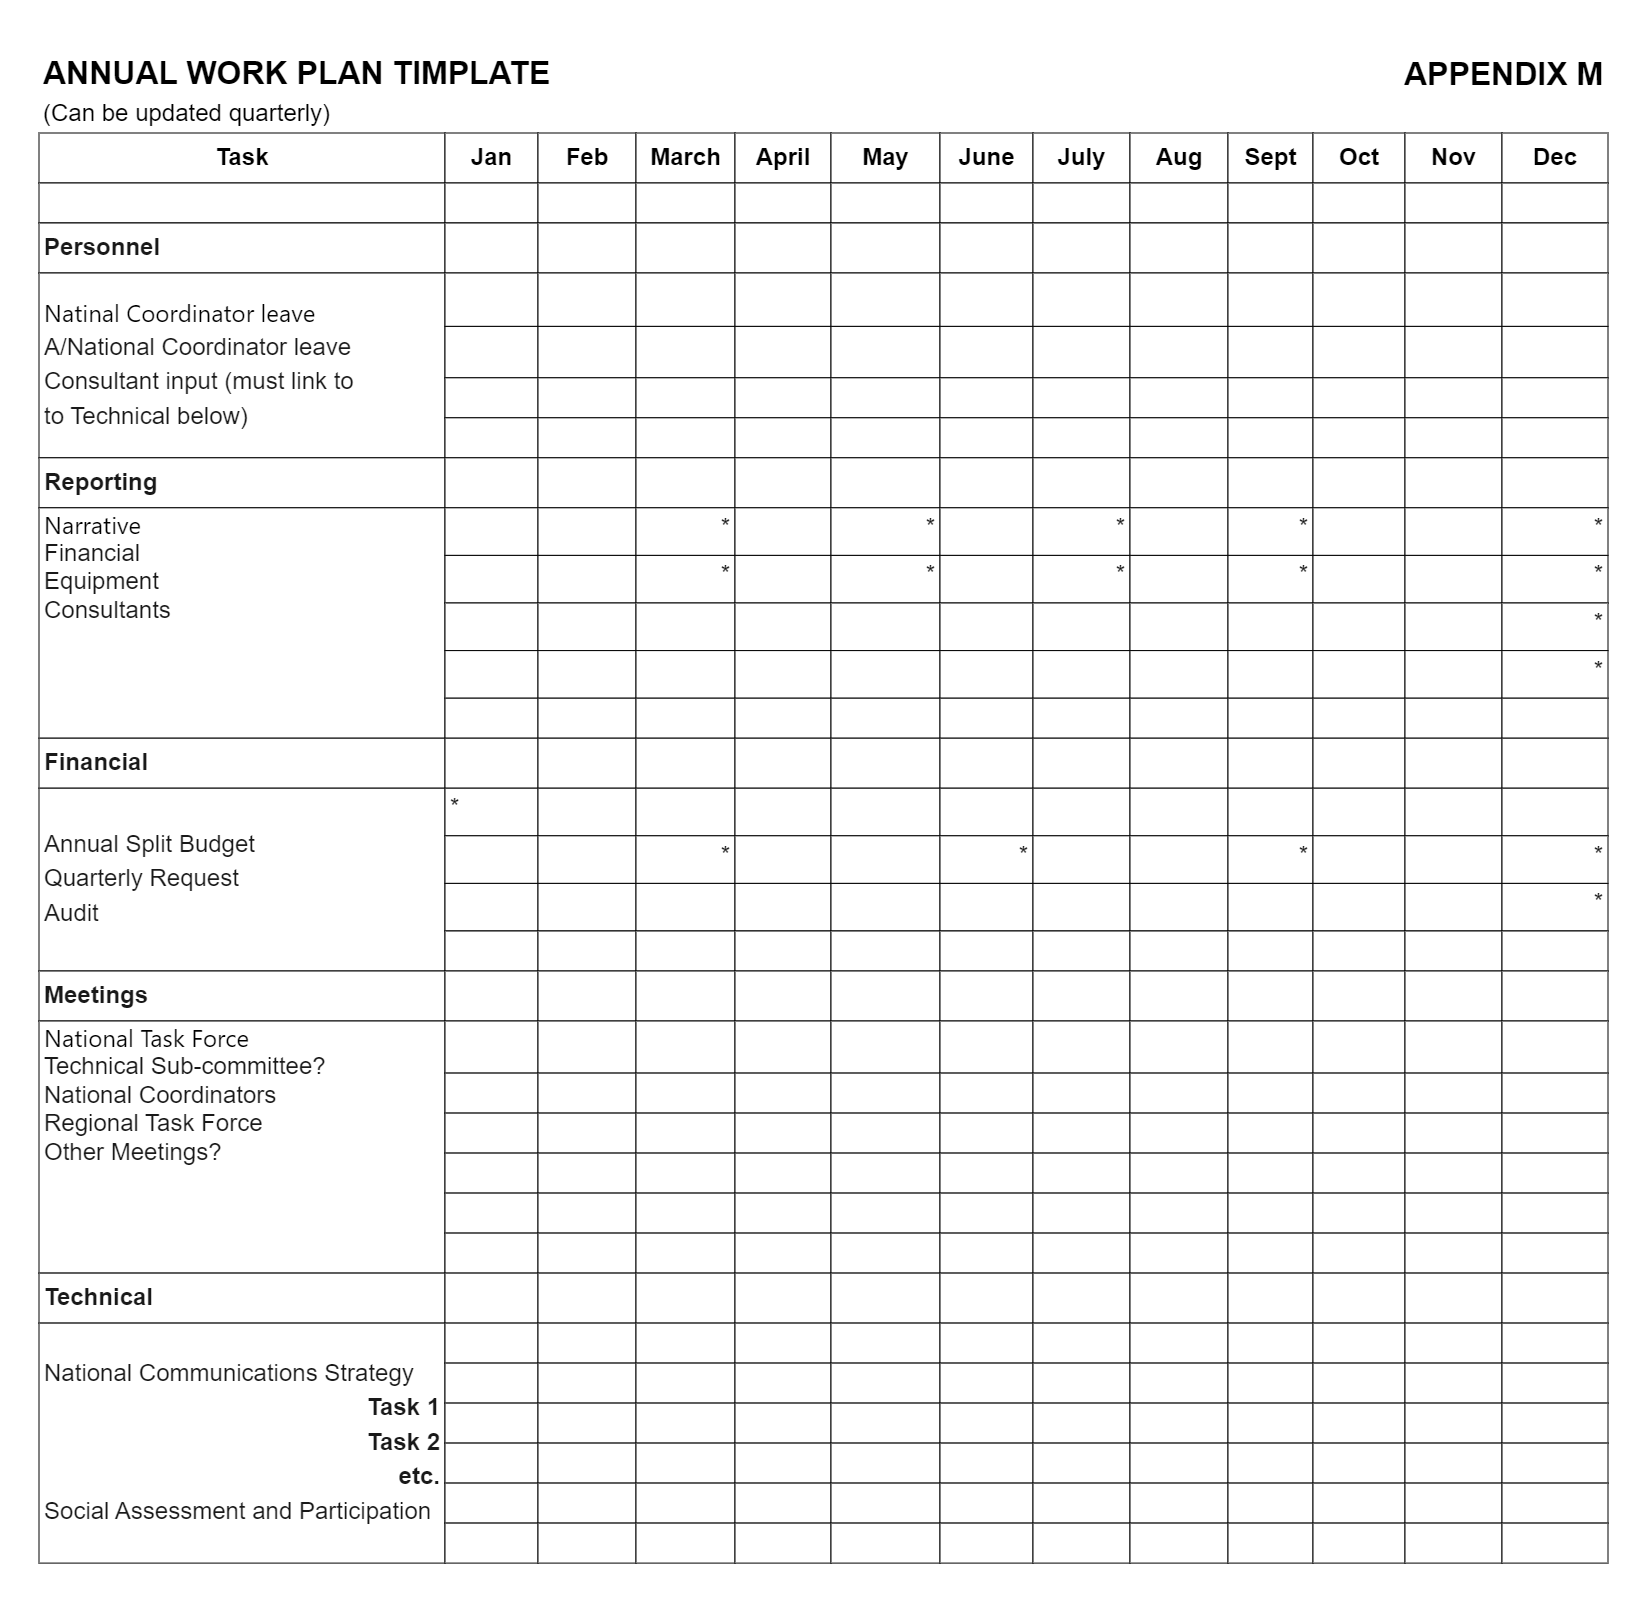 Annual Work Plan Features Table